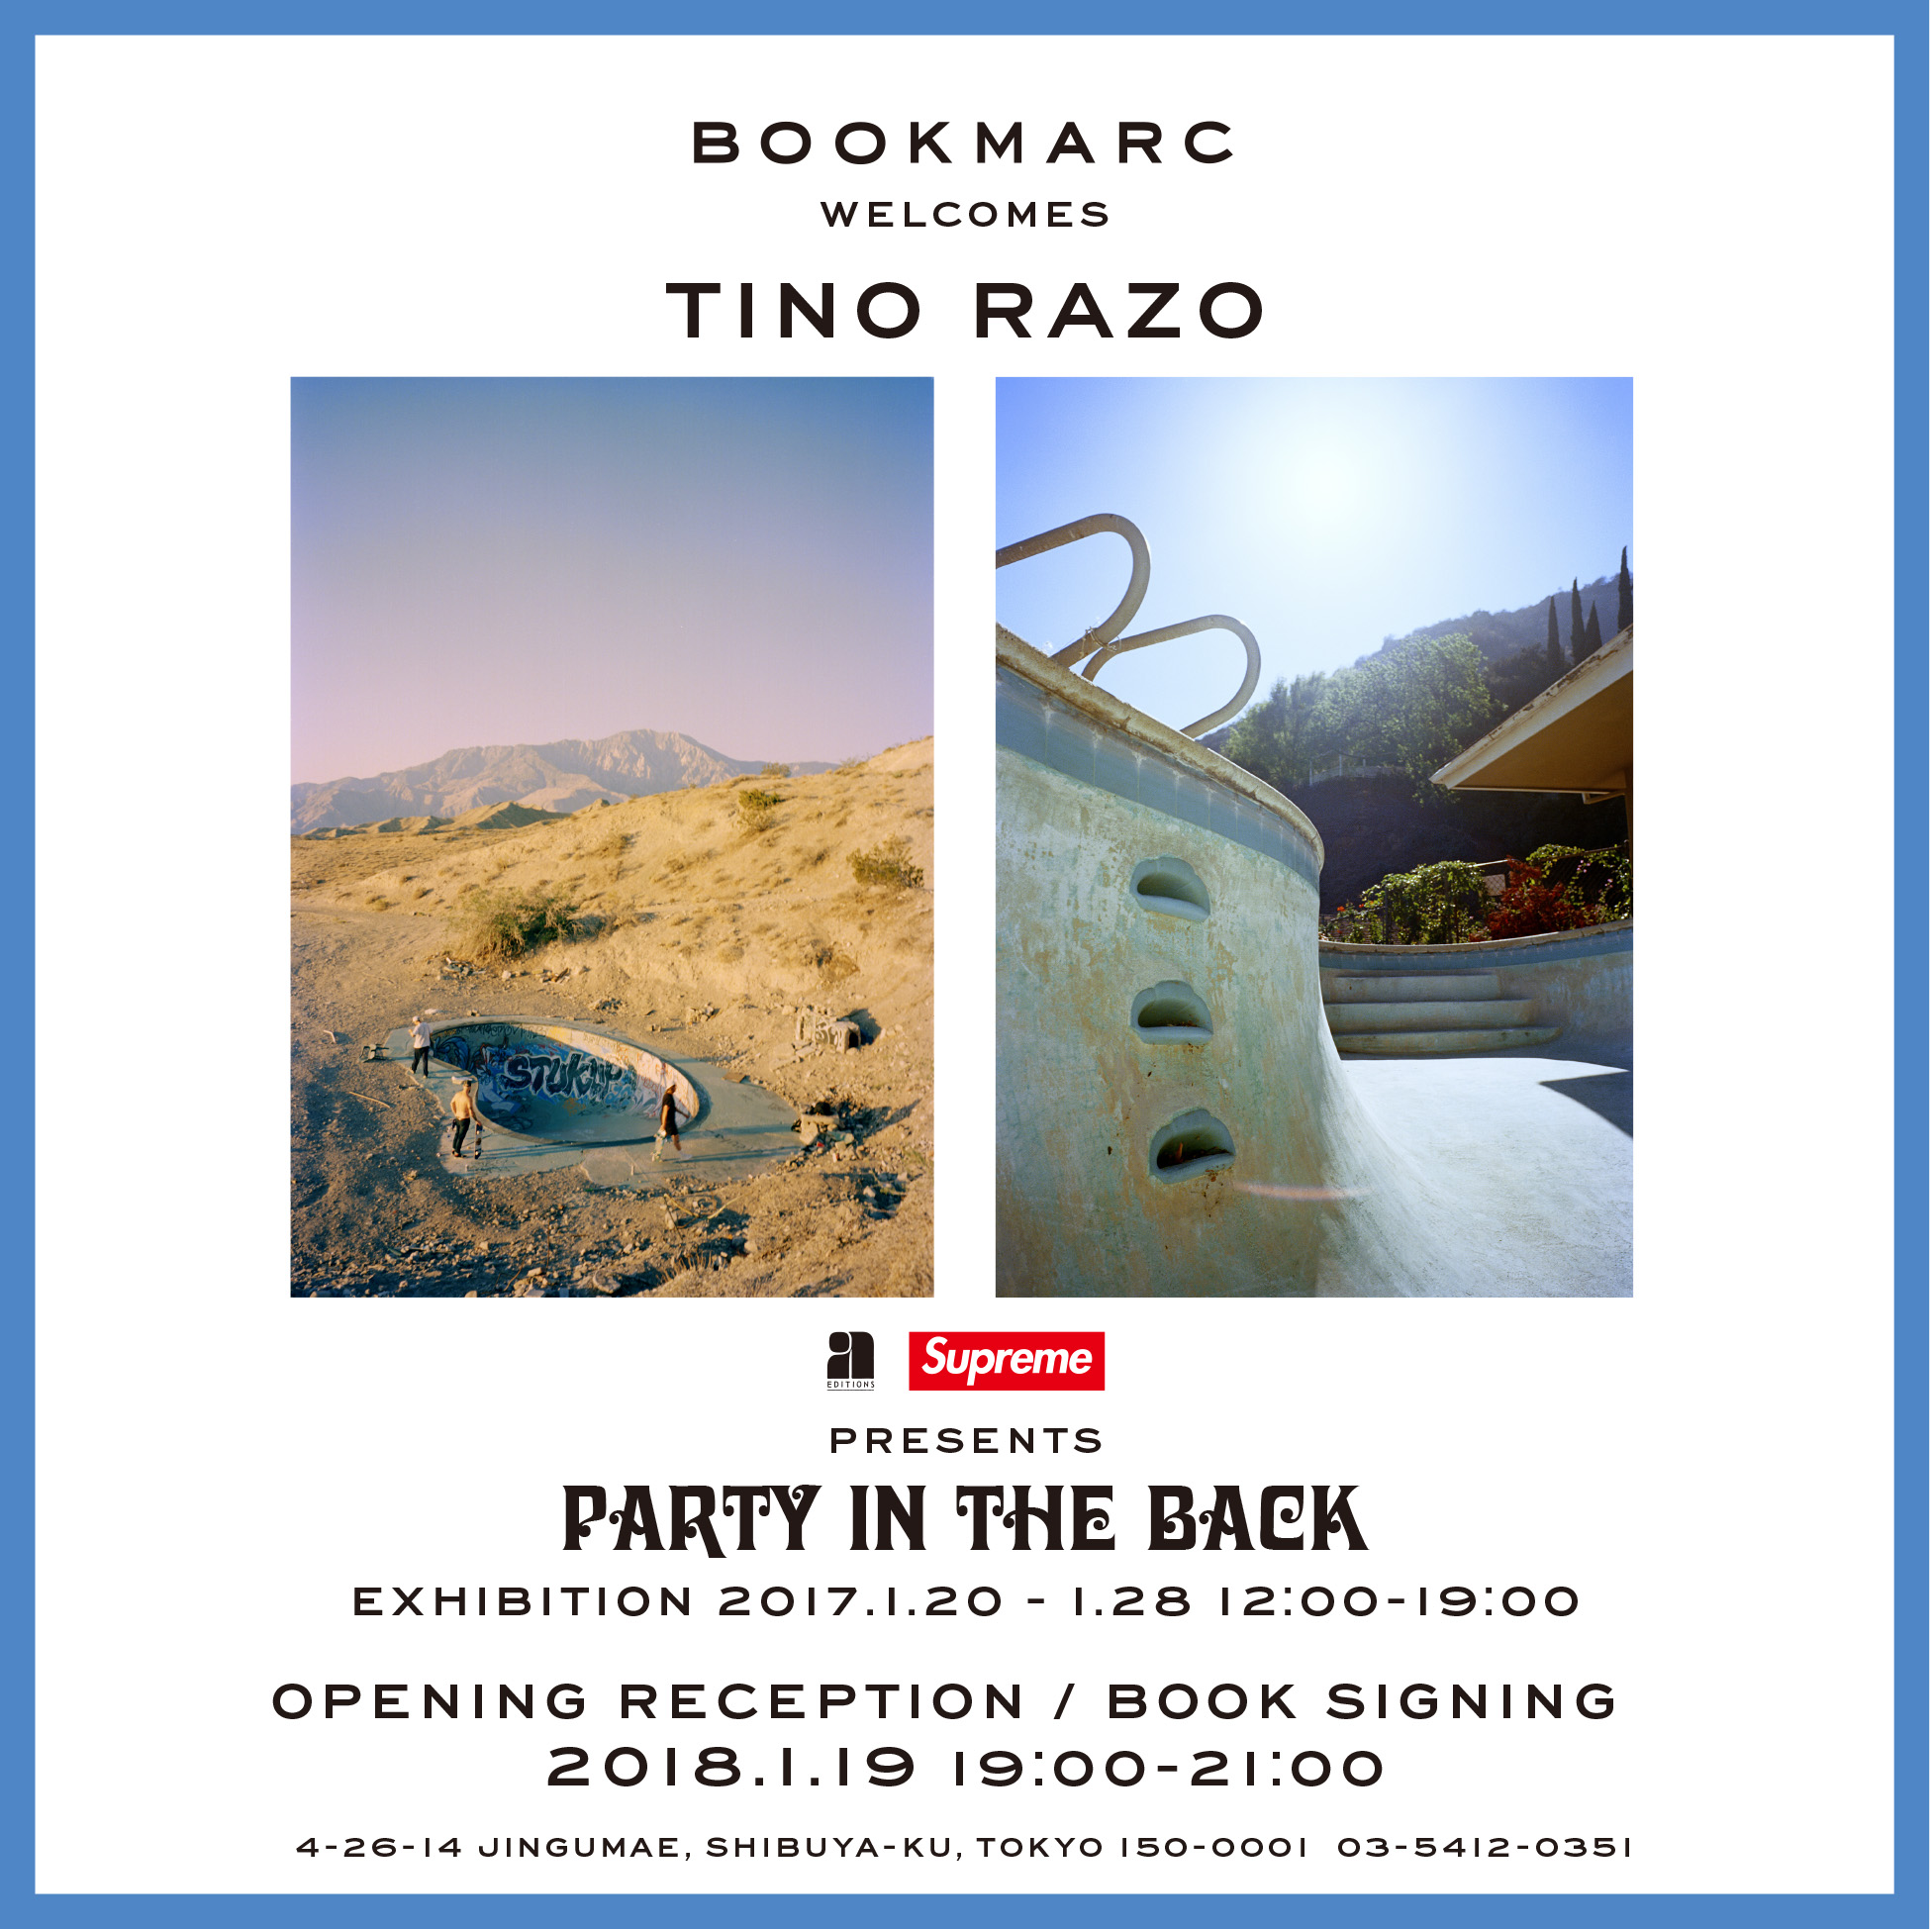 Party In The Back - Bookmarc Toyko Event